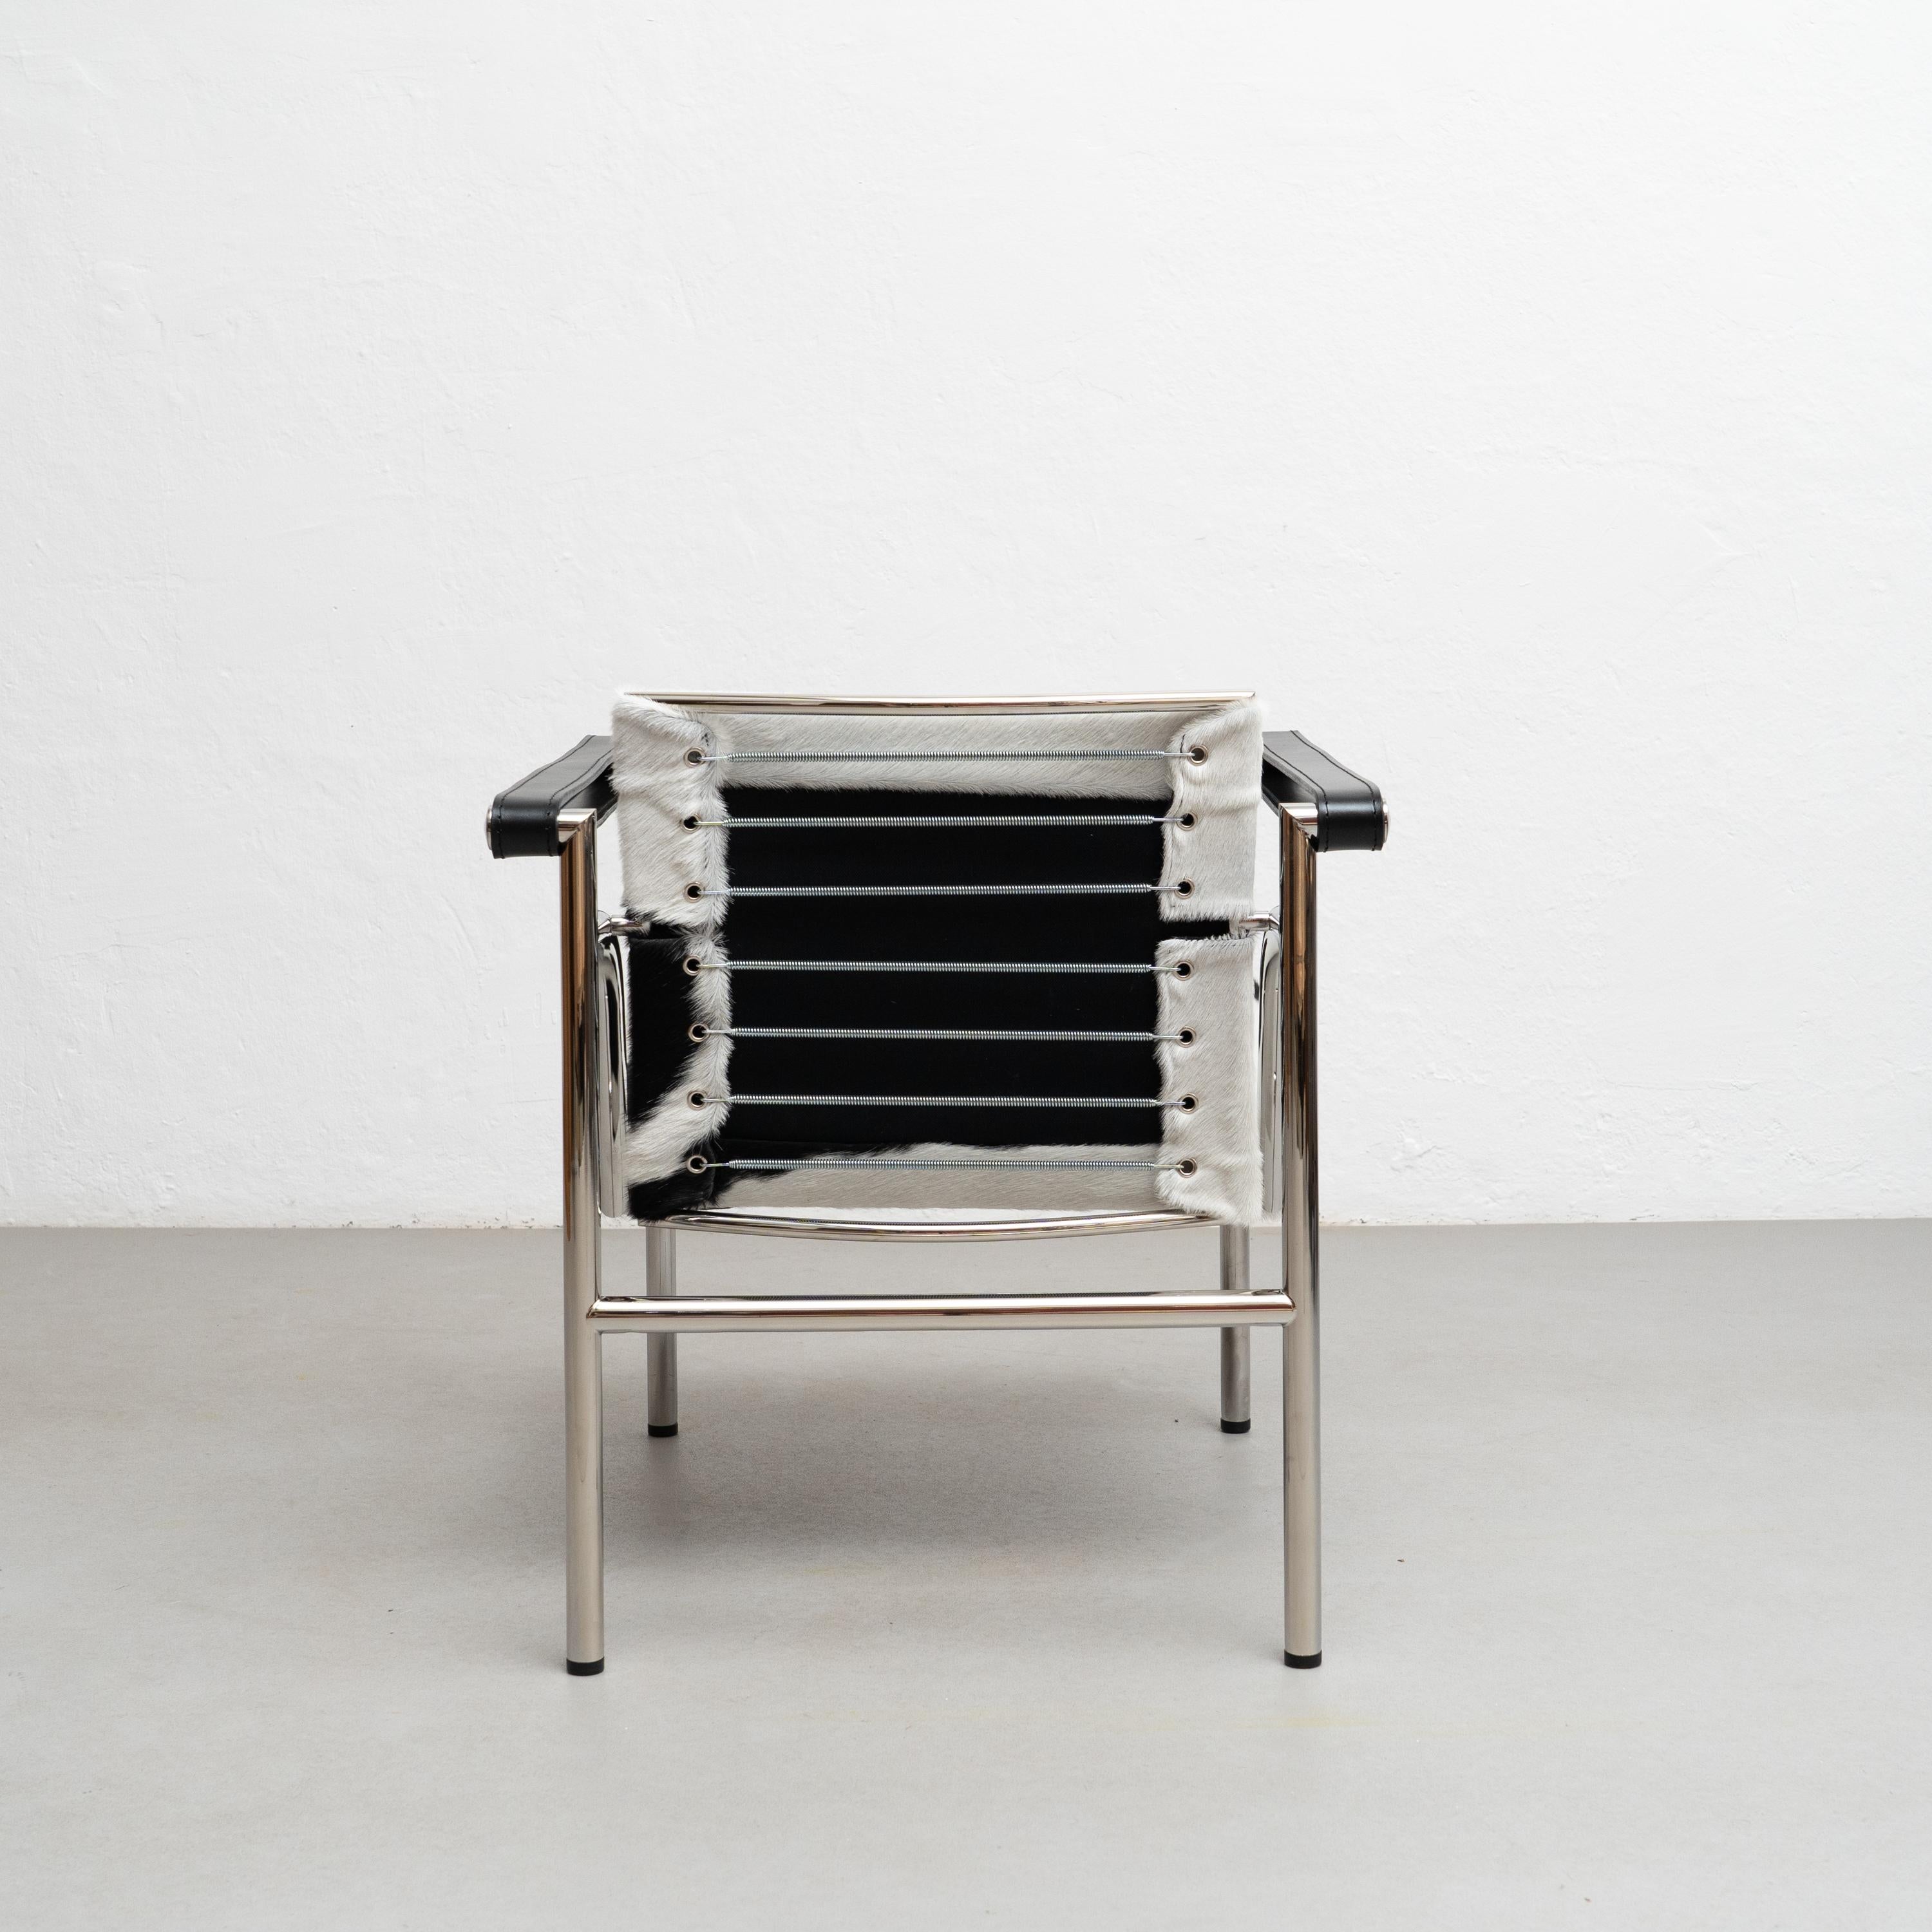 Chair designed by Le Corbusier, Pierre Jeanneret, Charlotte Perriand in 1928. Relaunched in 1965.
Manufactured by Cassina in Italy.

A light, compact chair designed and presented at the 1929 Salon d’Automne along with other important models, such